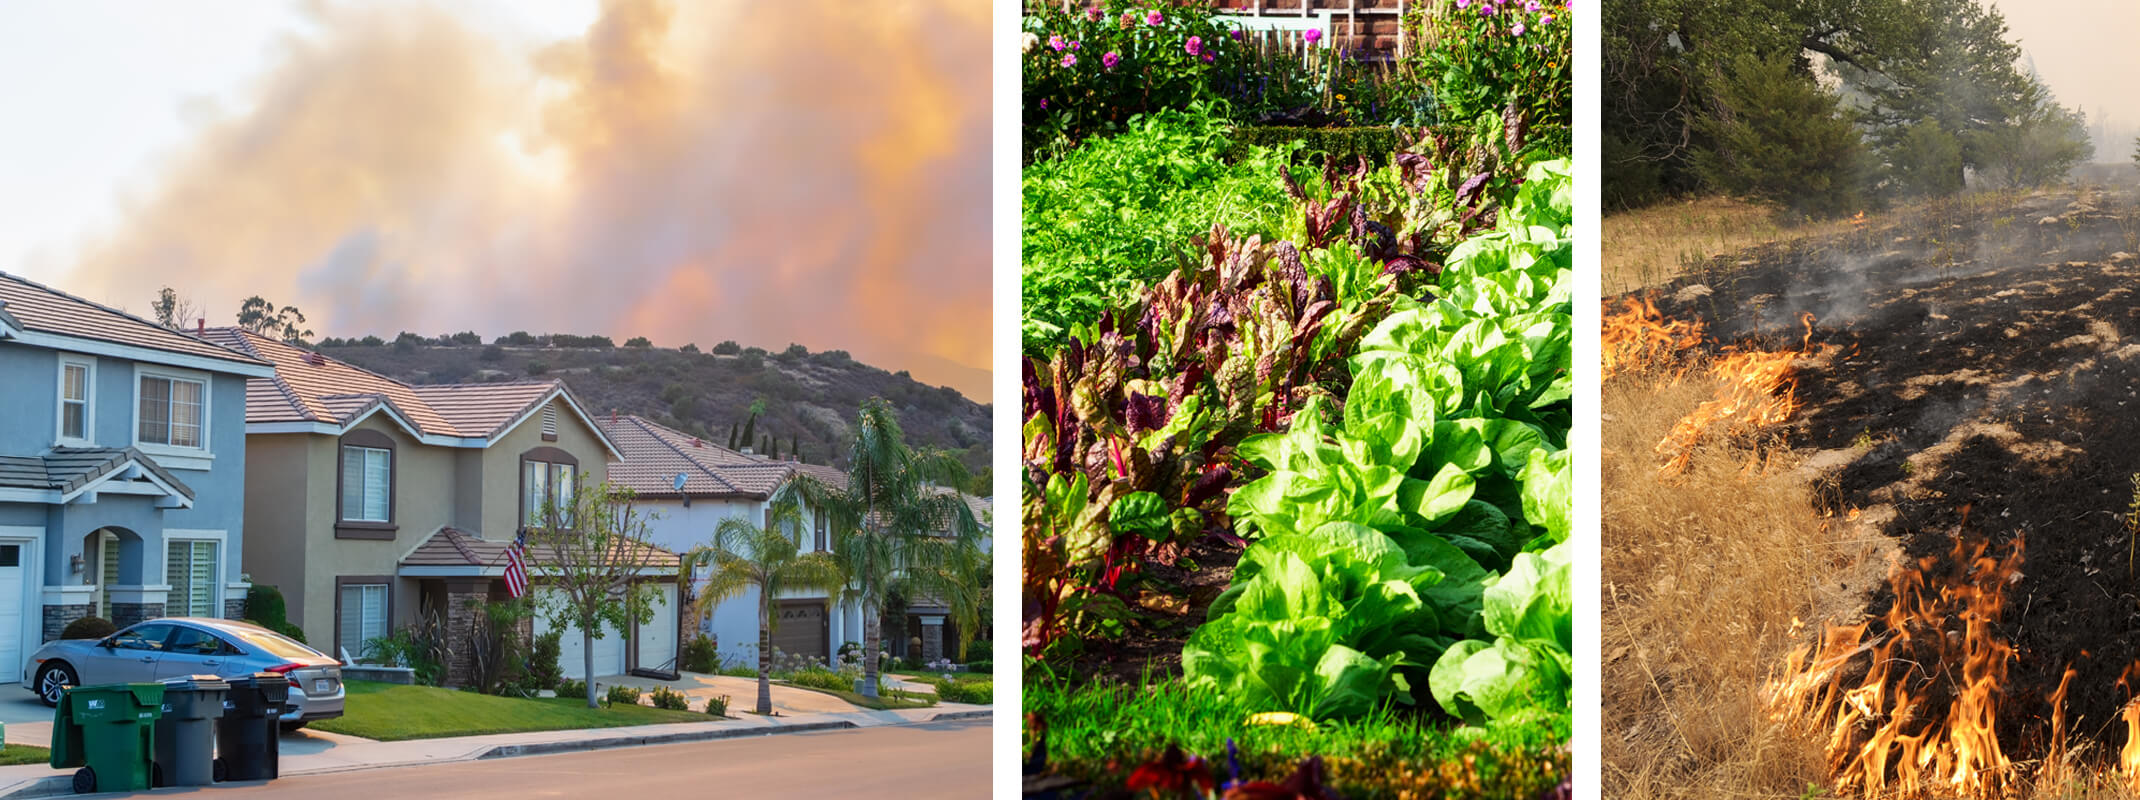 3 different images -the first is homes in a neighborhood with a wildfire in the hills behind, the second image is a lush healthy garden full of lettuce and other edibles and the third image is a grass fire with trees in the background